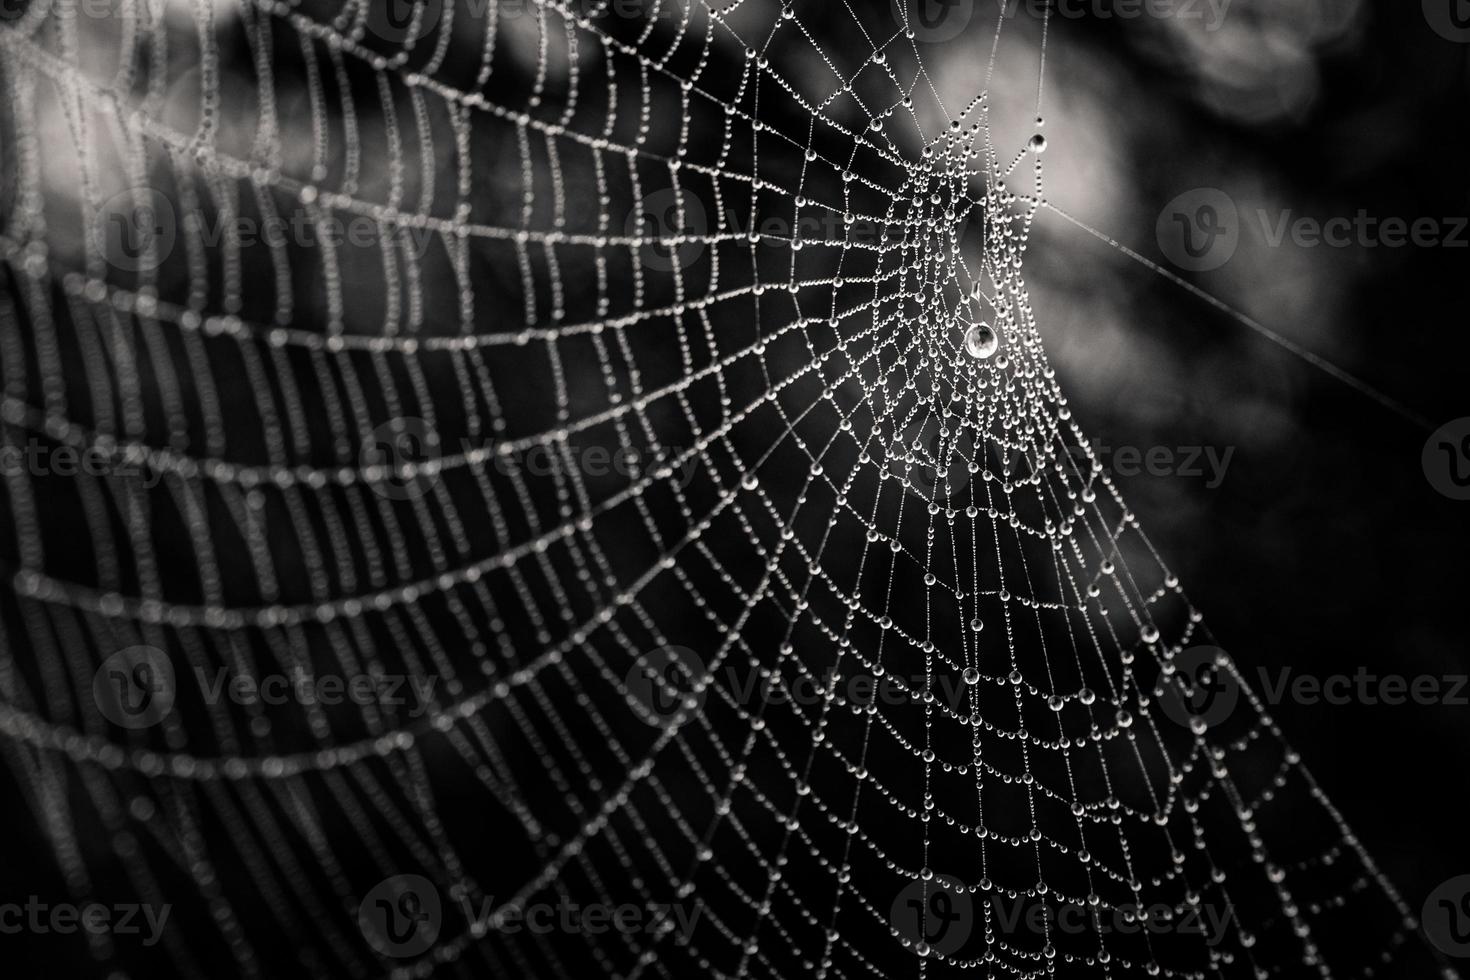 little delicate water drops on a spider web in close-up on a foggy day photo